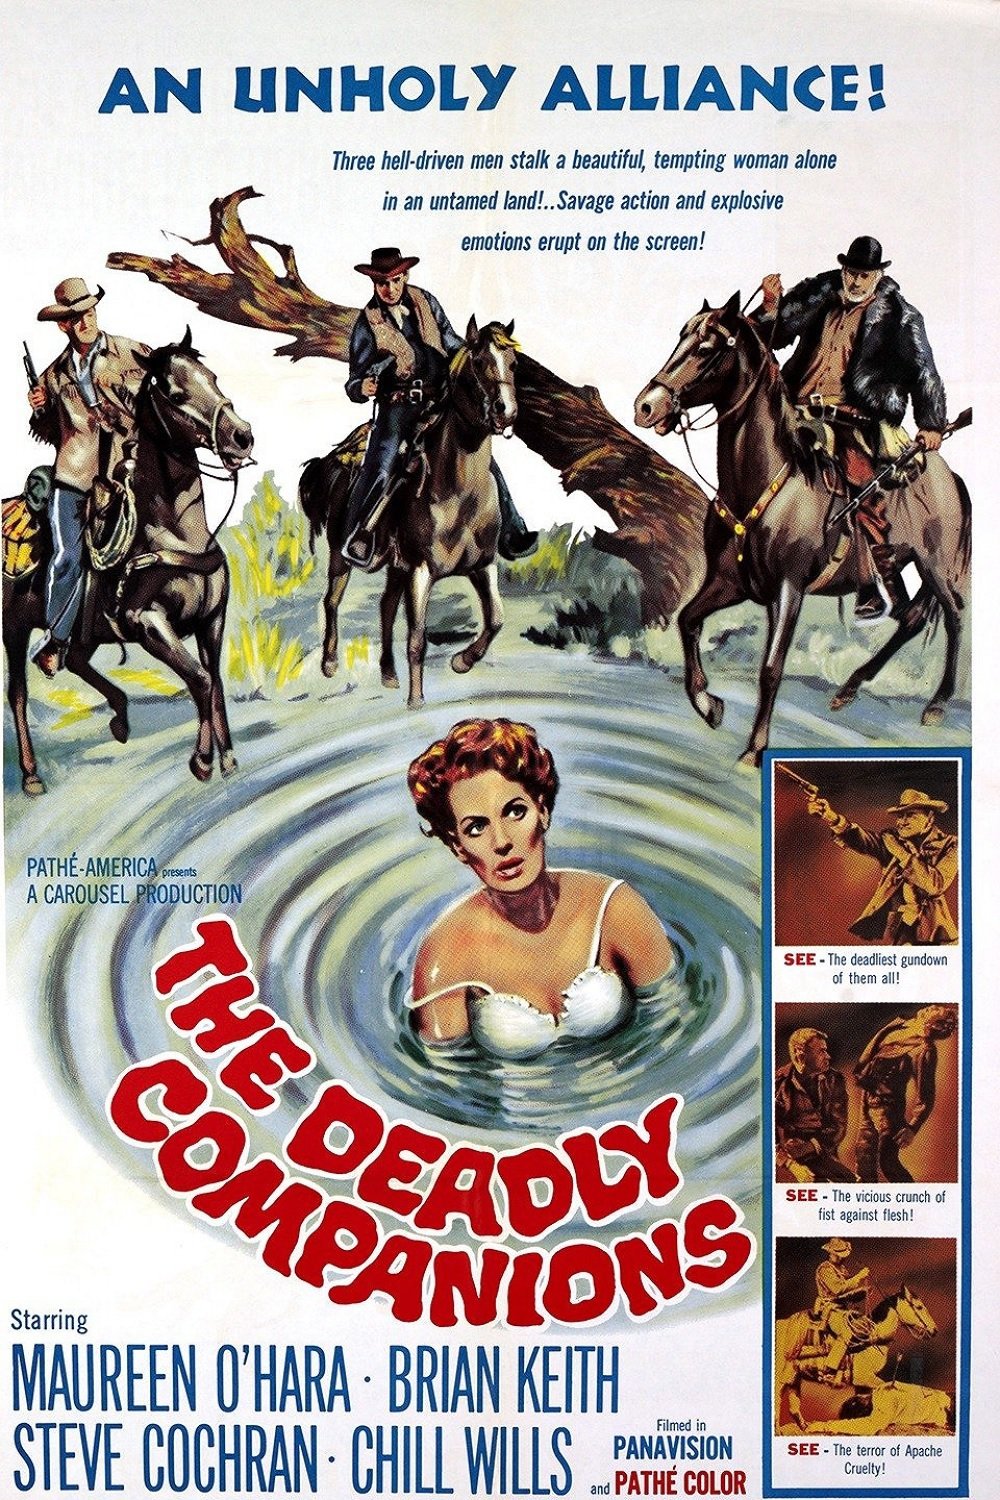 The Deadly Companions (1961) starring Maureen O'Hara on DVD on DVD